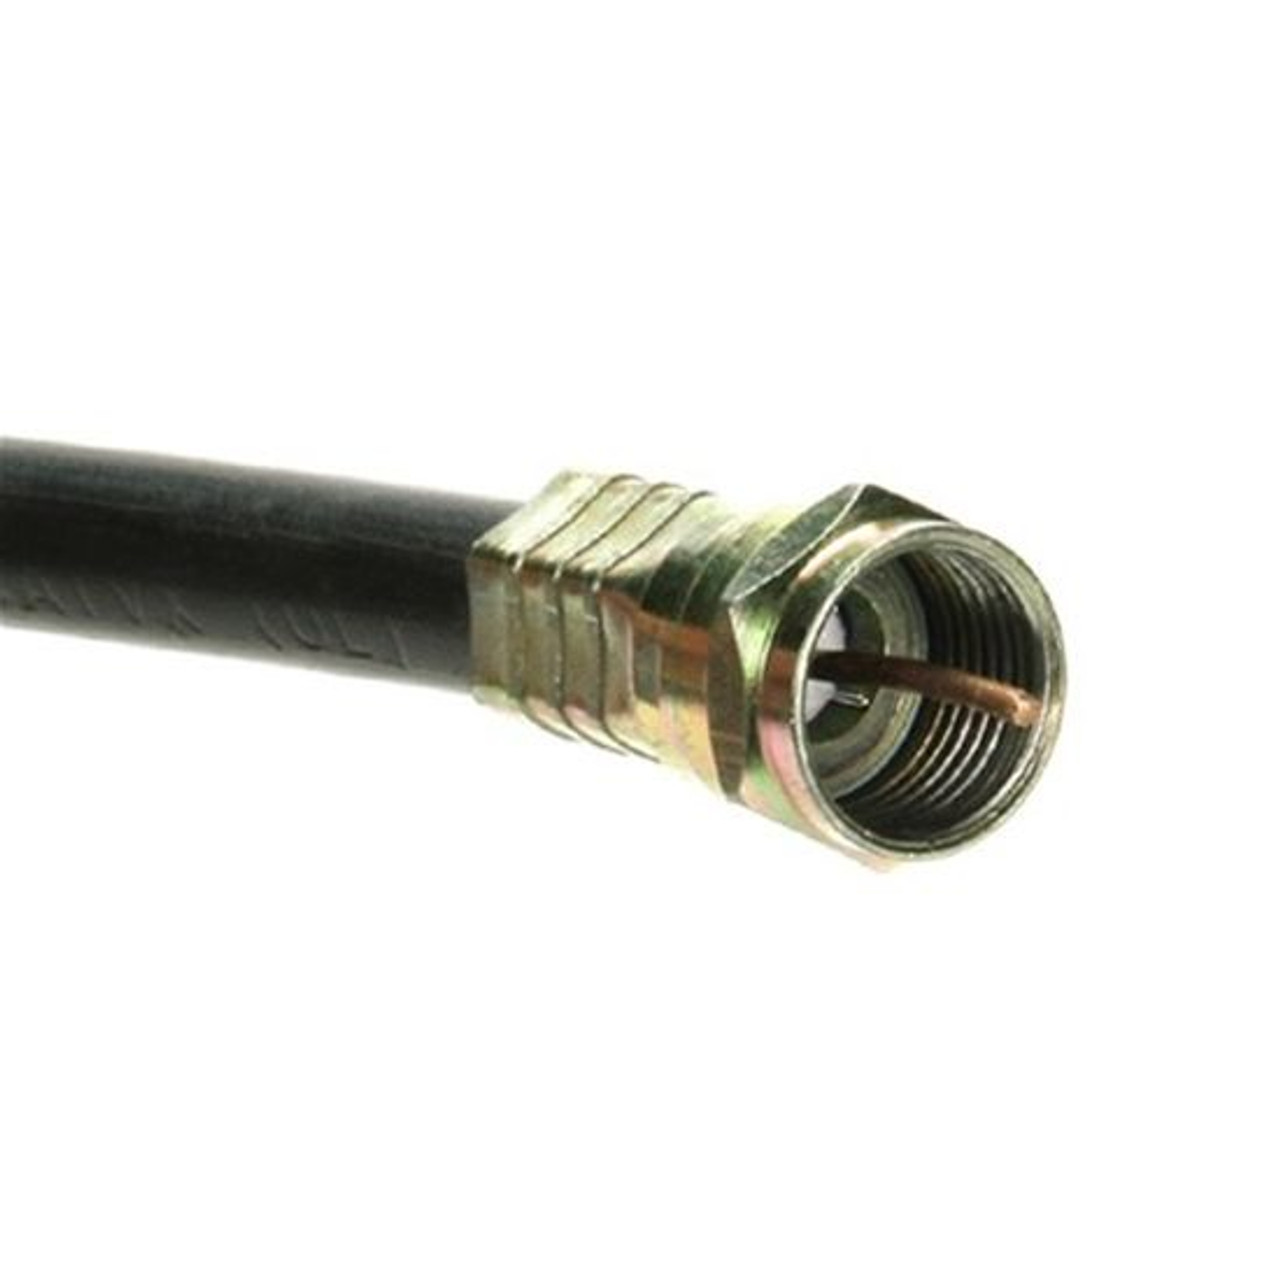 Eagle 1' FT RG59 Coax Cable F Pin Male Each End Black with Gold F-Male to F-Male Connector Each End Audio Video Signal Component RG-59 Shielded HDTV Jumper, 75 Ohm Video Cable